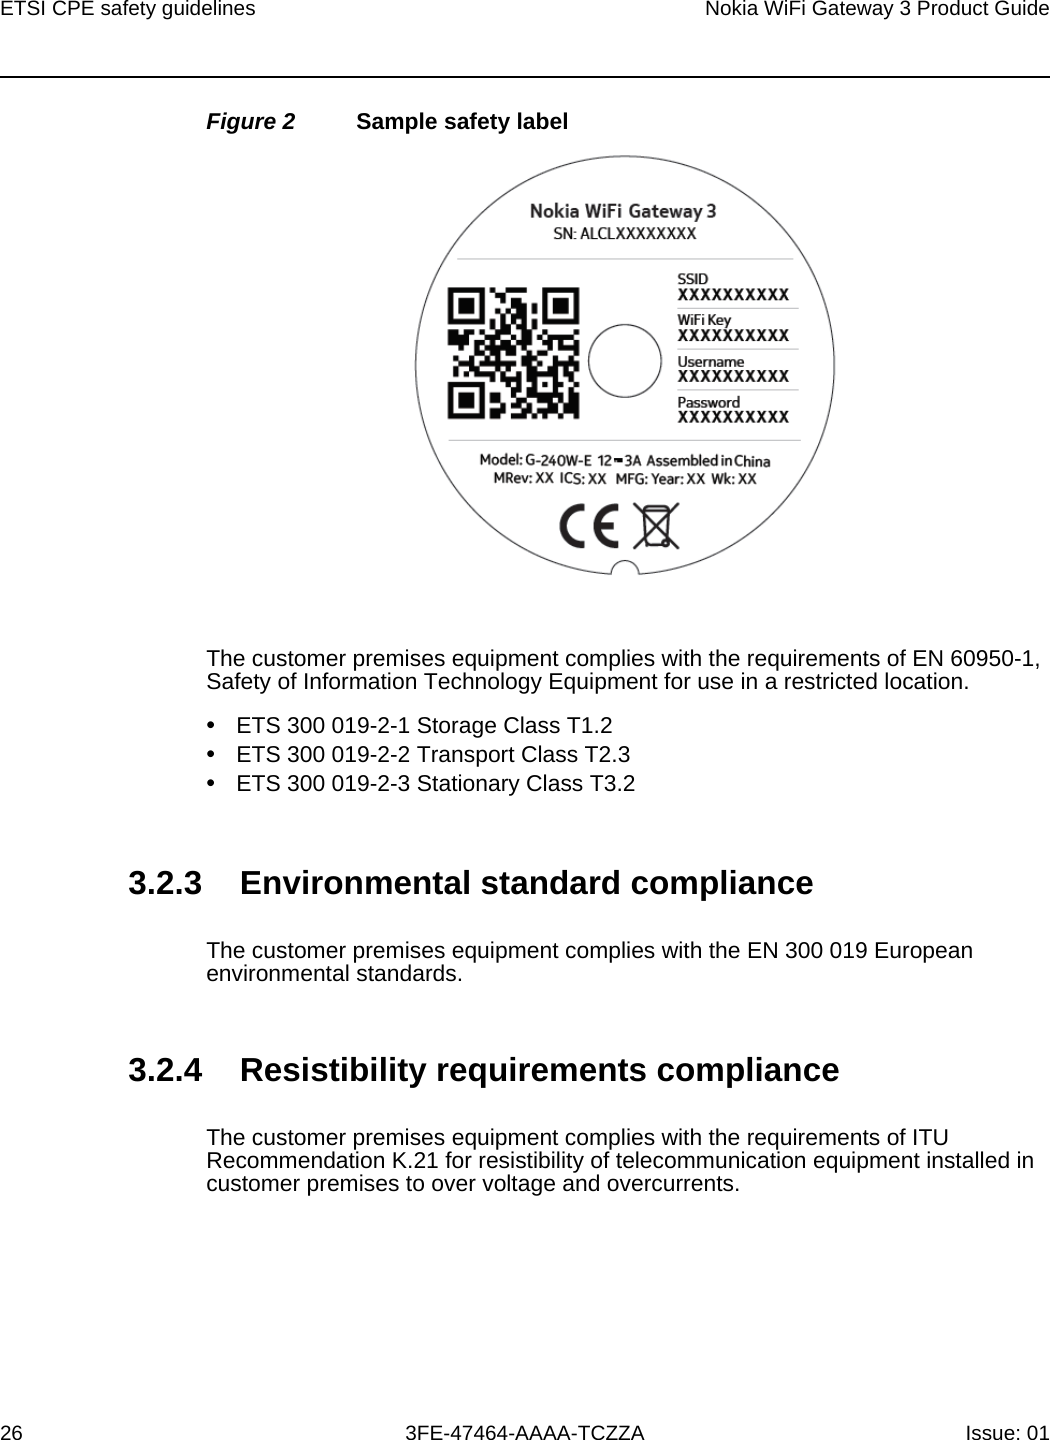 ETSI CPE safety guidelines26Nokia WiFi Gateway 3 Product Guide3FE-47464-AAAA-TCZZA Issue: 01 Figure 2 Sample safety labelThe customer premises equipment complies with the requirements of EN 60950-1, Safety of Information Technology Equipment for use in a restricted location.•ETS 300 019-2-1 Storage Class T1.2•ETS 300 019-2-2 Transport Class T2.3•ETS 300 019-2-3 Stationary Class T3.23.2.3 Environmental standard complianceThe customer premises equipment complies with the EN 300 019 European environmental standards.3.2.4 Resistibility requirements complianceThe customer premises equipment complies with the requirements of ITU Recommendation K.21 for resistibility of telecommunication equipment installed in customer premises to over voltage and overcurrents.